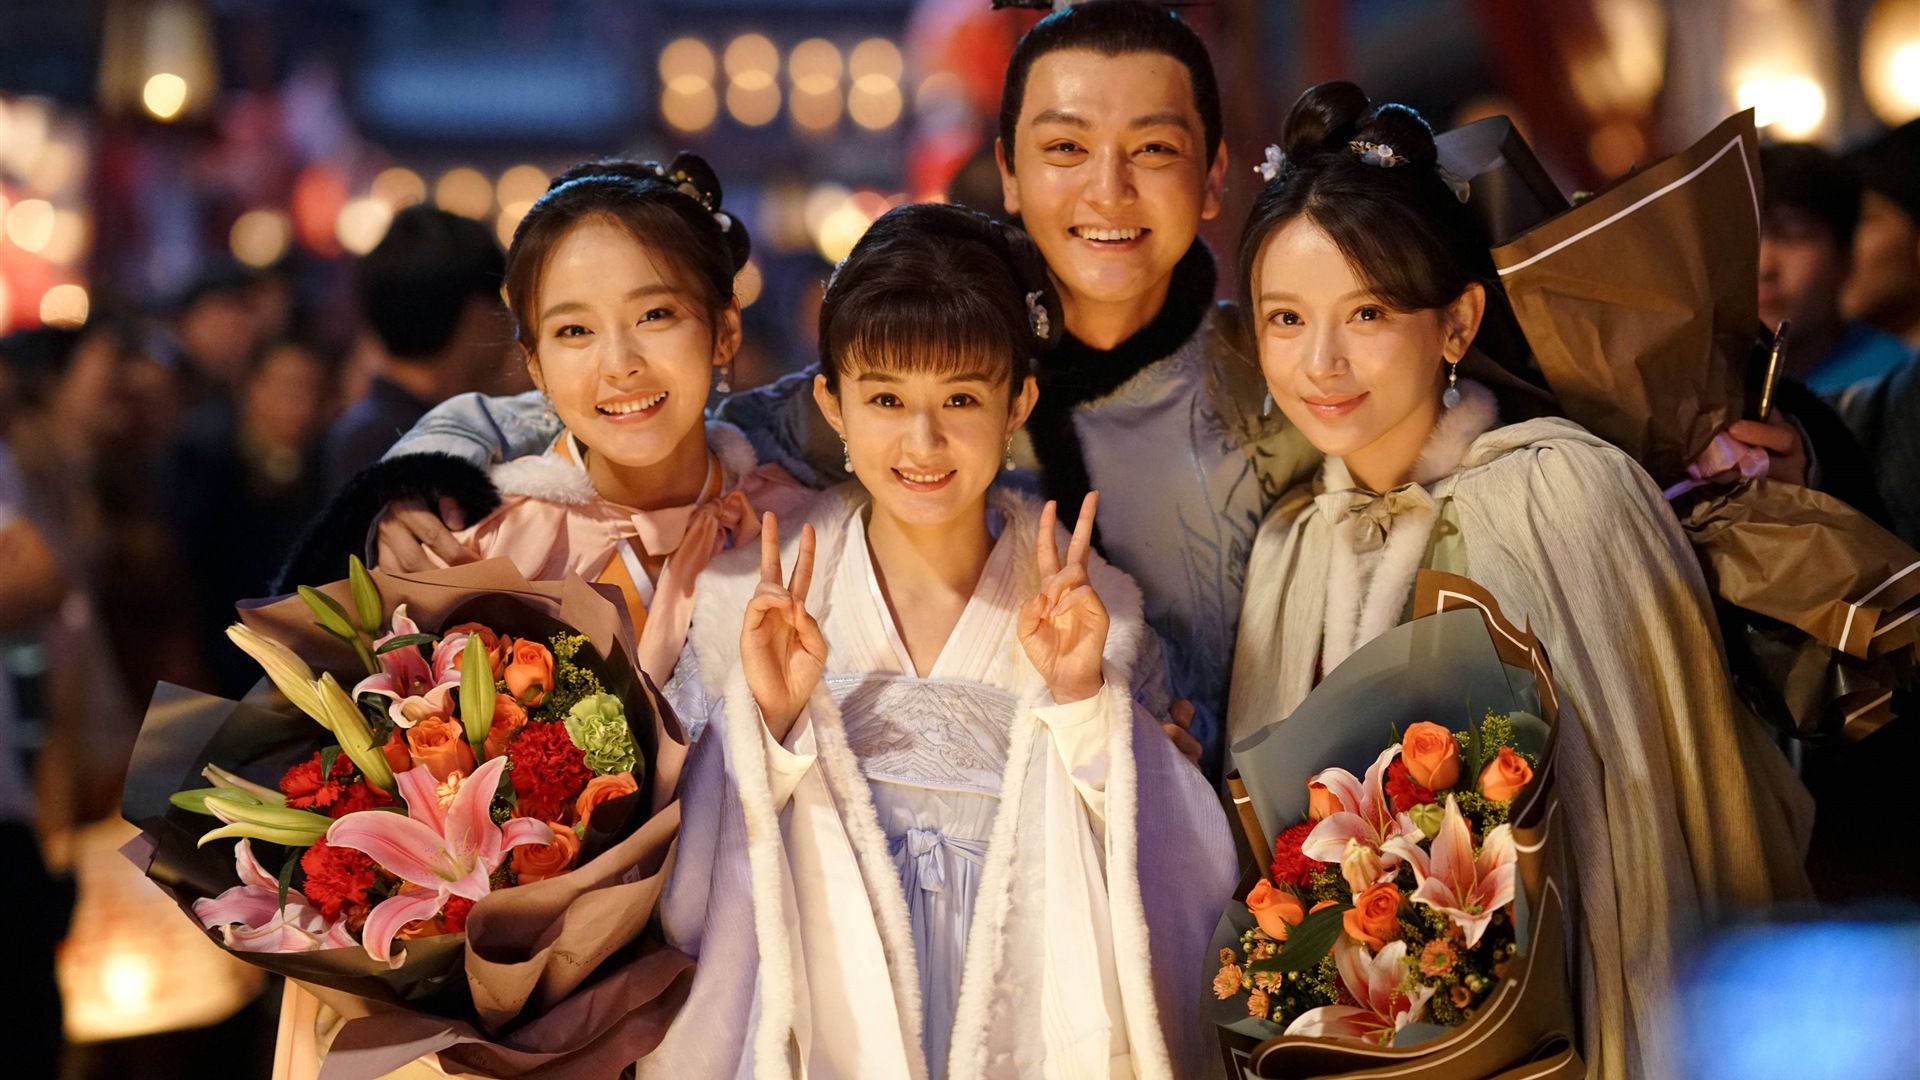 The Story Of MingLan, TV series HD wallpapers #48 - 1920x1080